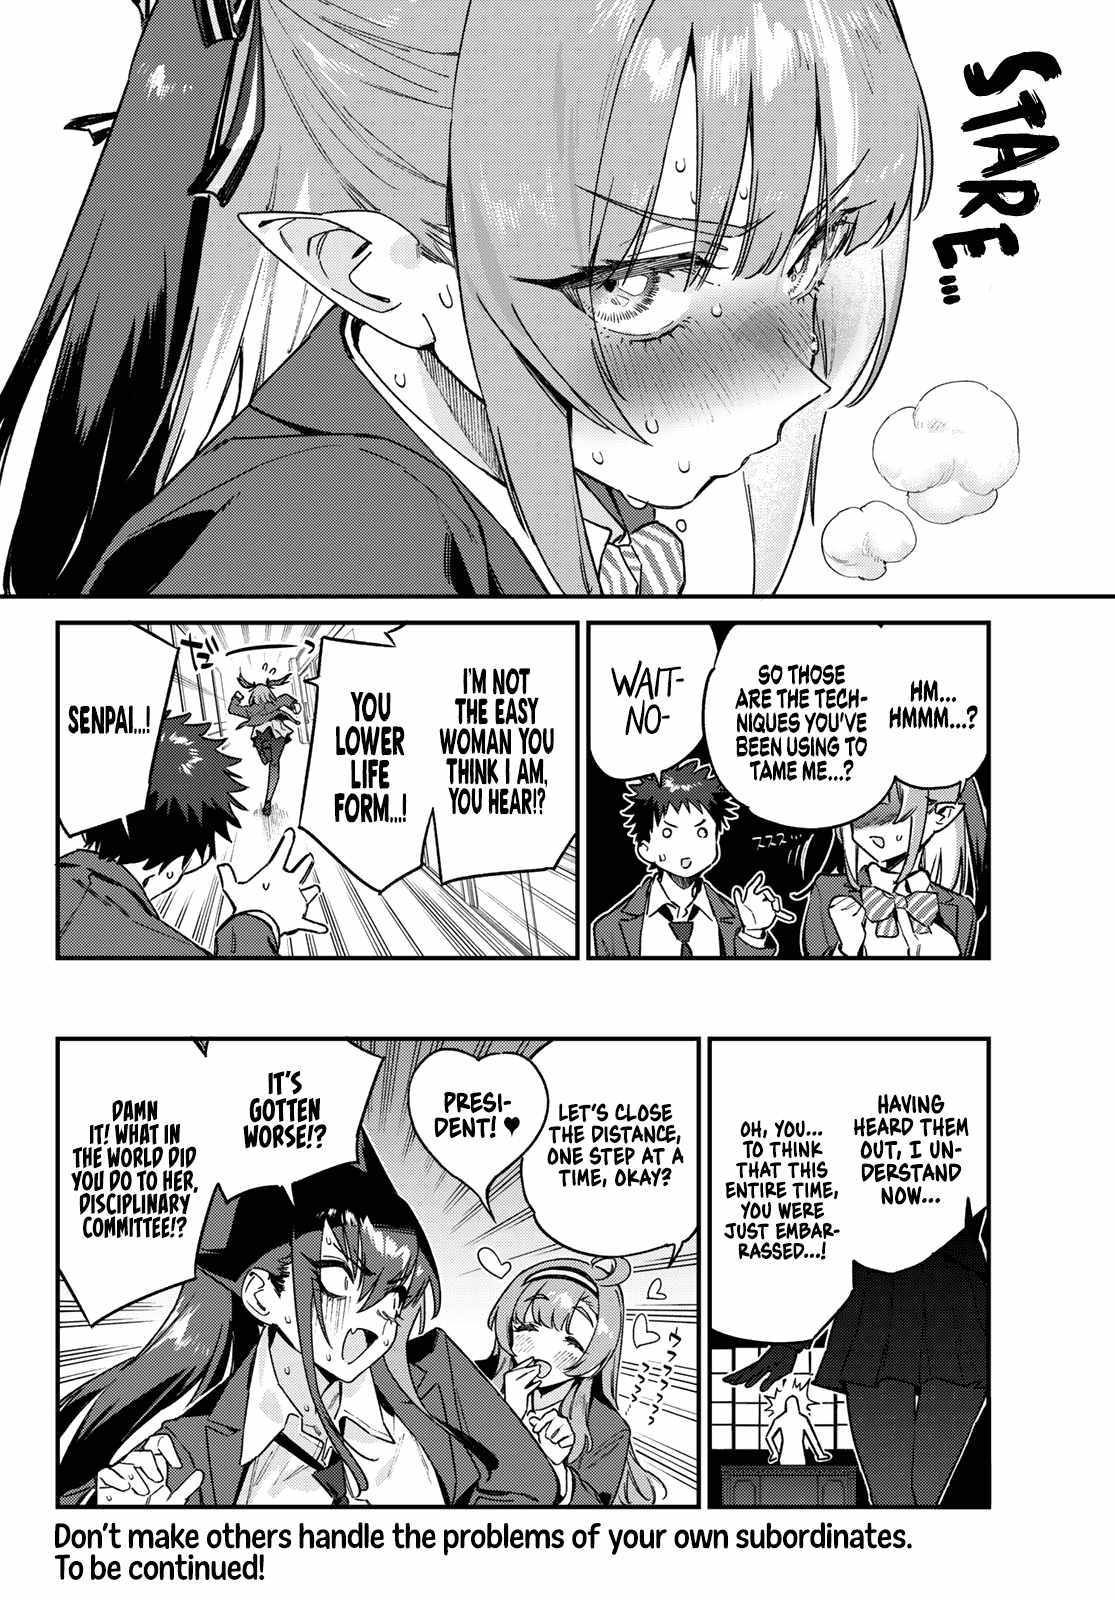 Kanan-Sama Is Easy As Hell! - 95 page 9-28bb7710